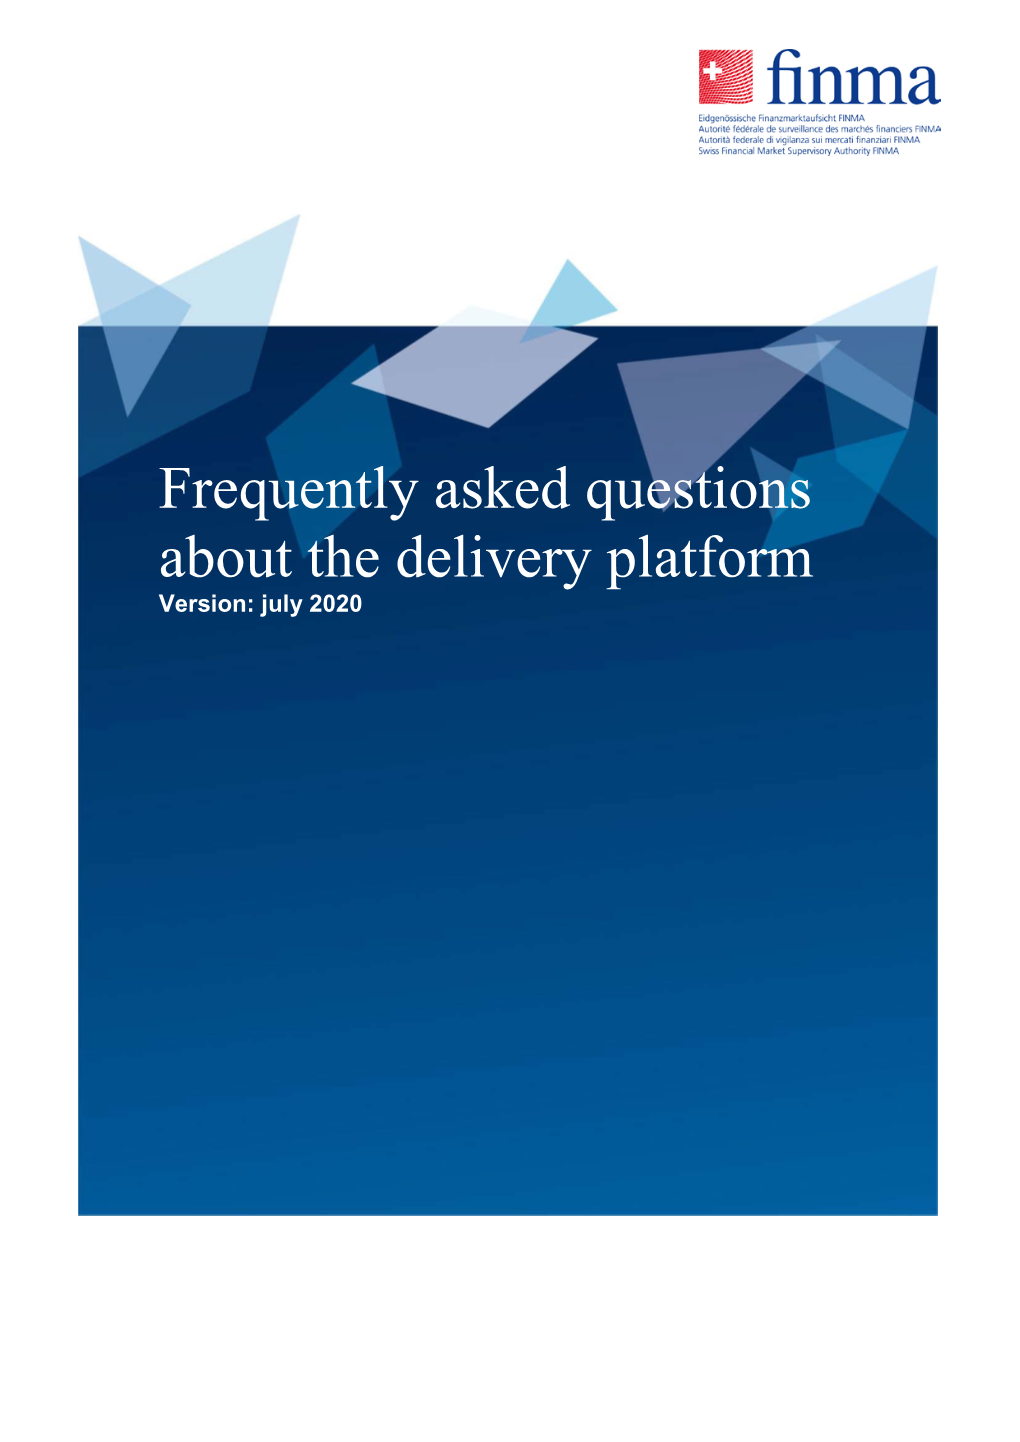 Frequently Asked Questions About the Delivery Platform Version: July 2020